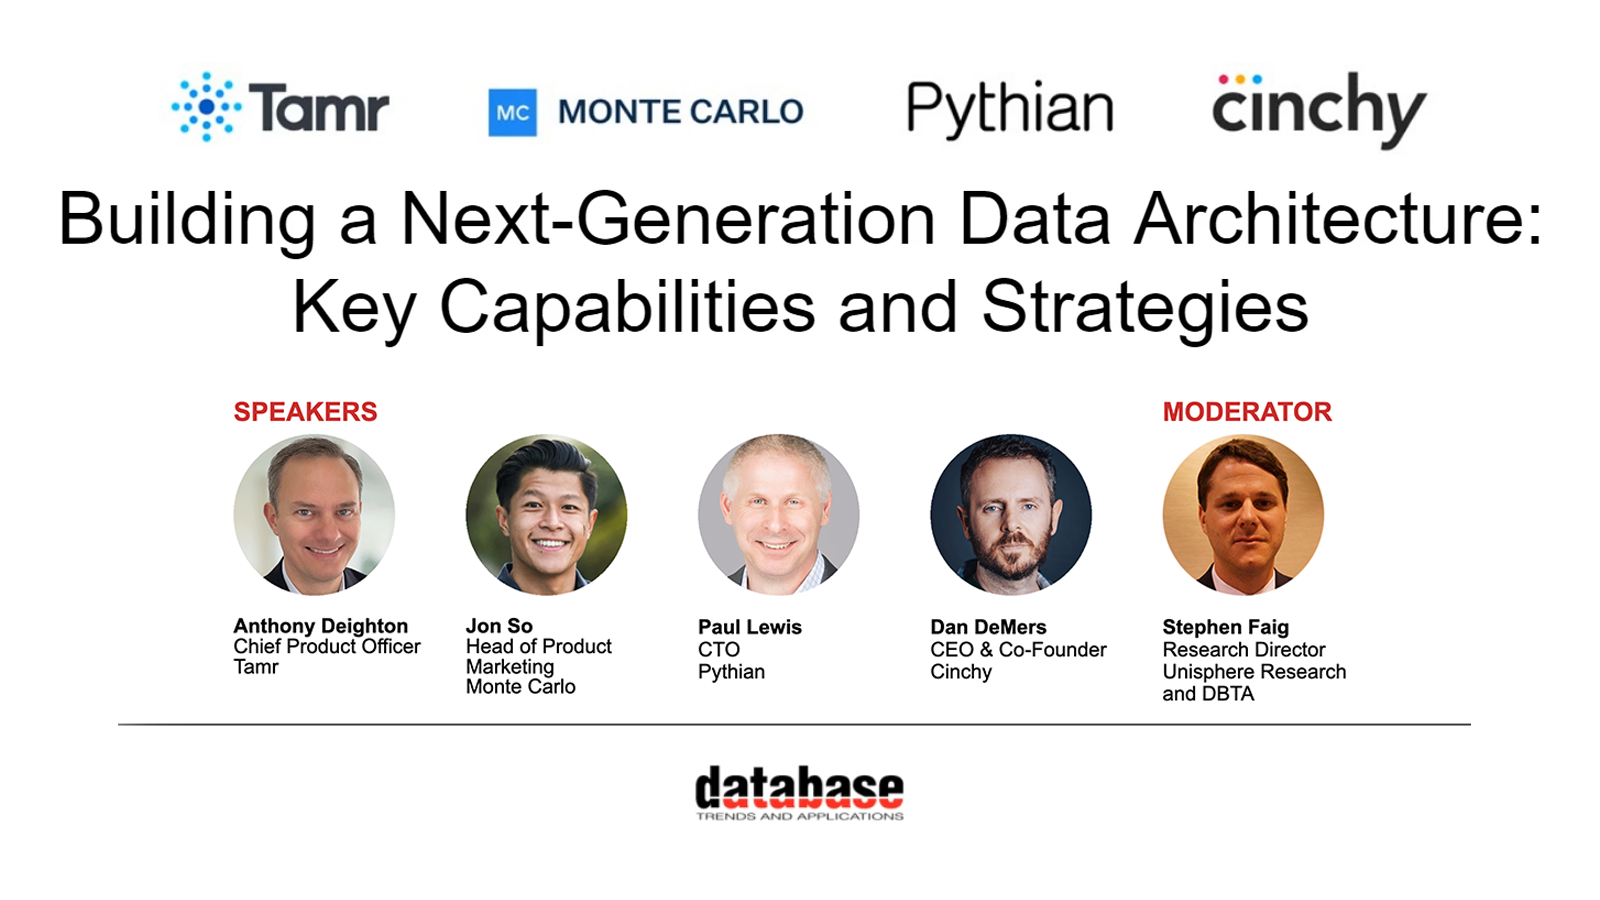 [DBTA Roundtable] Building a Next-Generation Data Architecture: Key Capabilities and Strategies